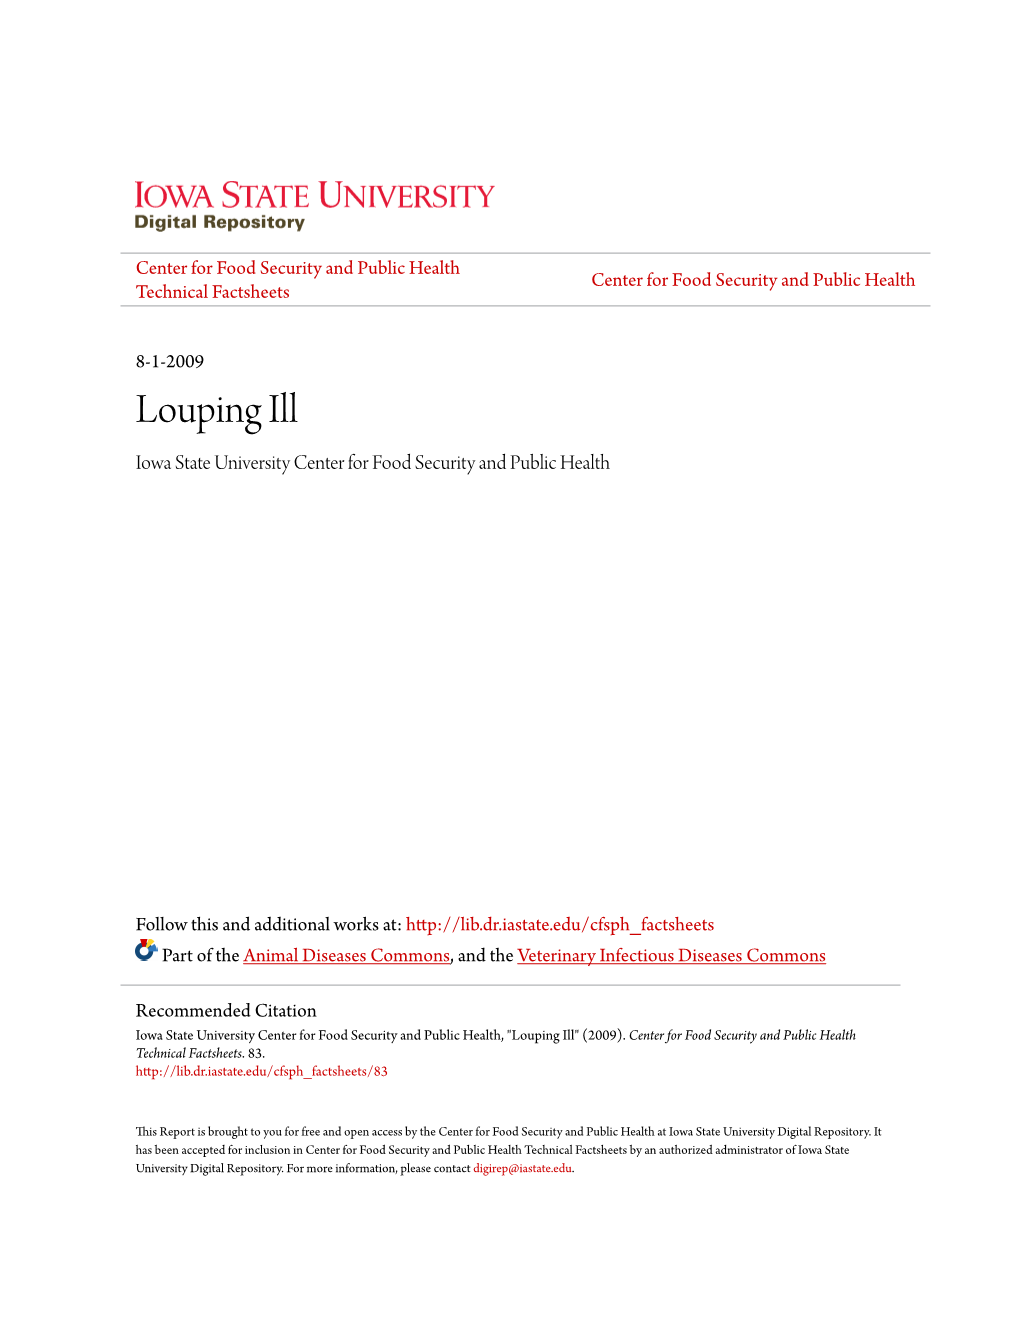 Louping Ill Iowa State University Center for Food Security and Public Health